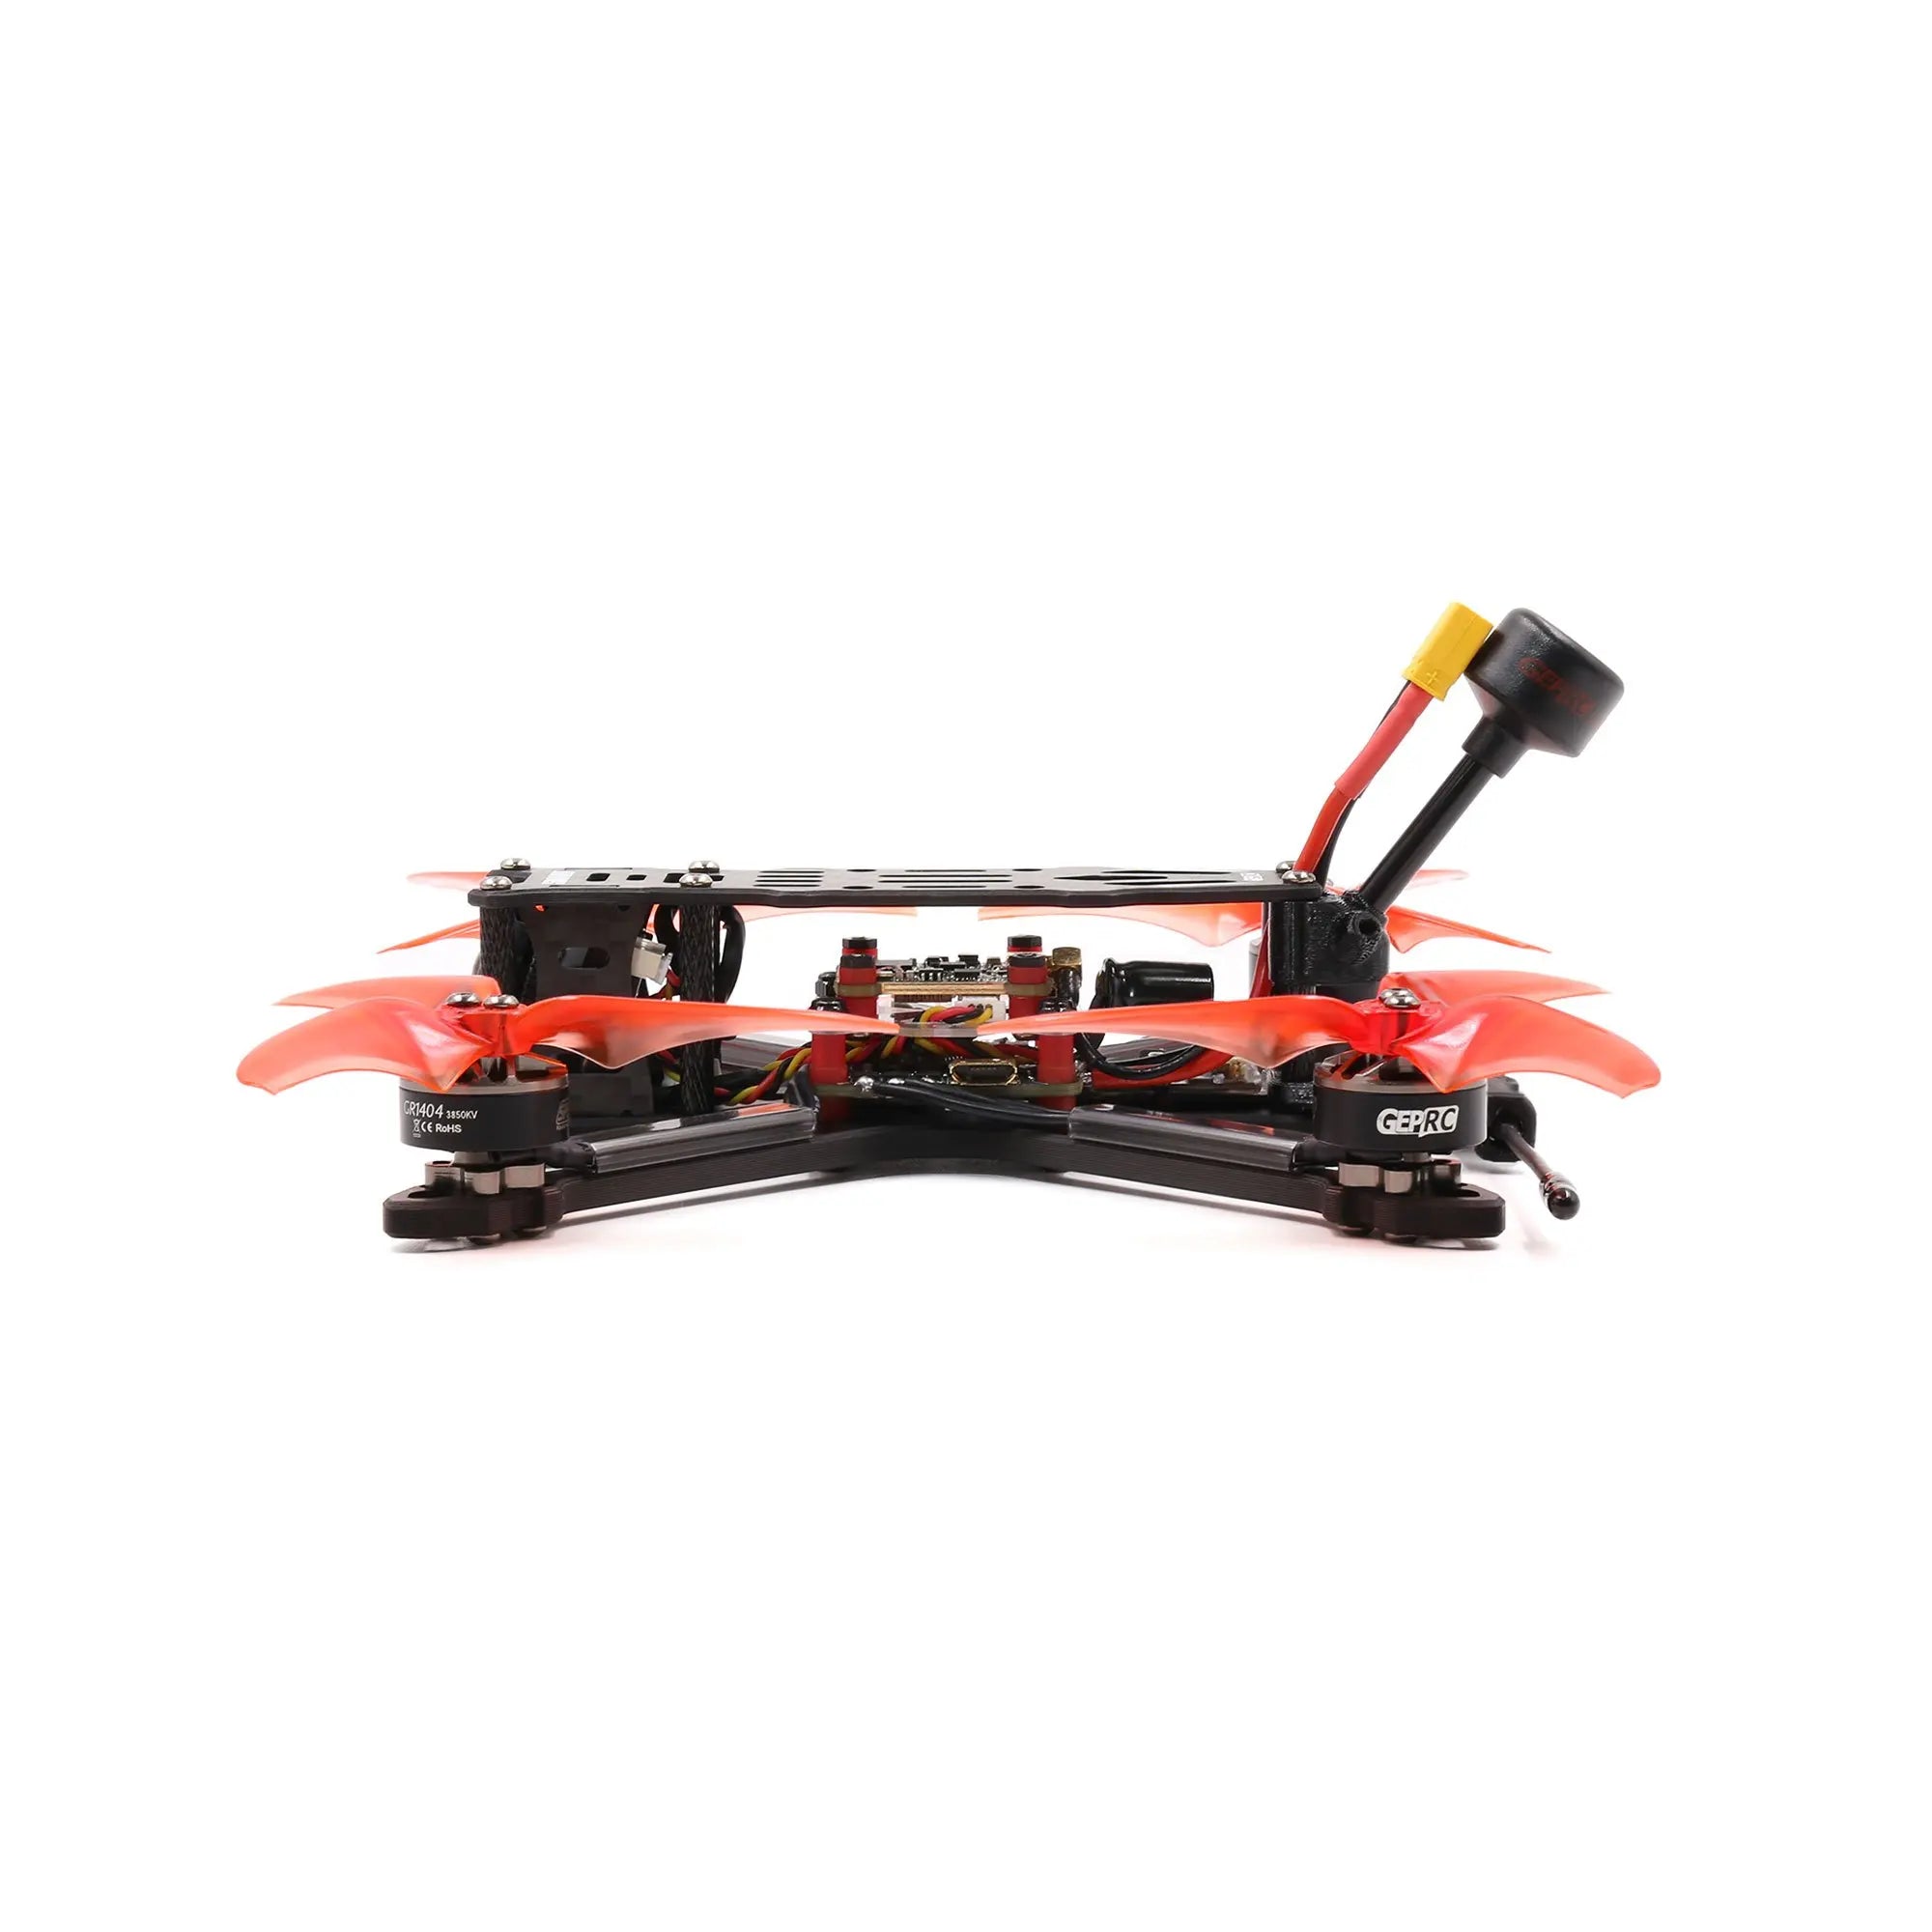 GEPRC SMART 35 FPV Drone, this is a wonderful 3.5-inch freesyle quadcopter.